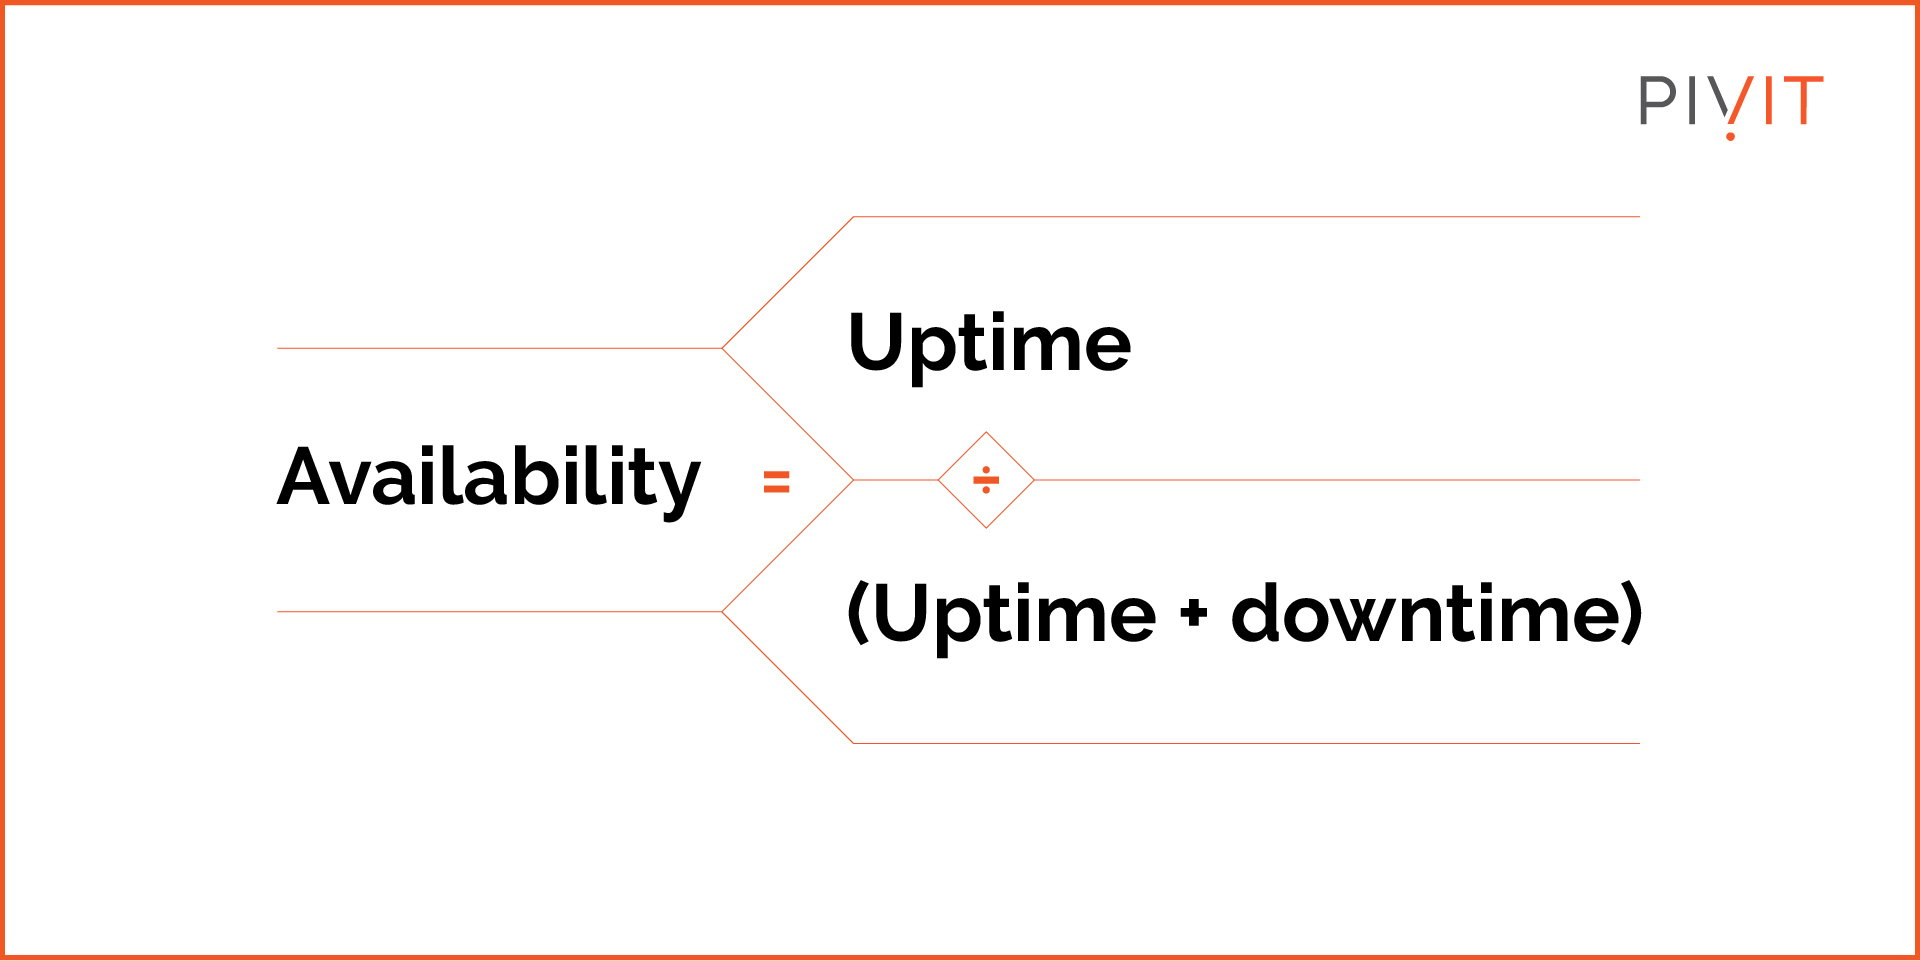 Network availability calculation